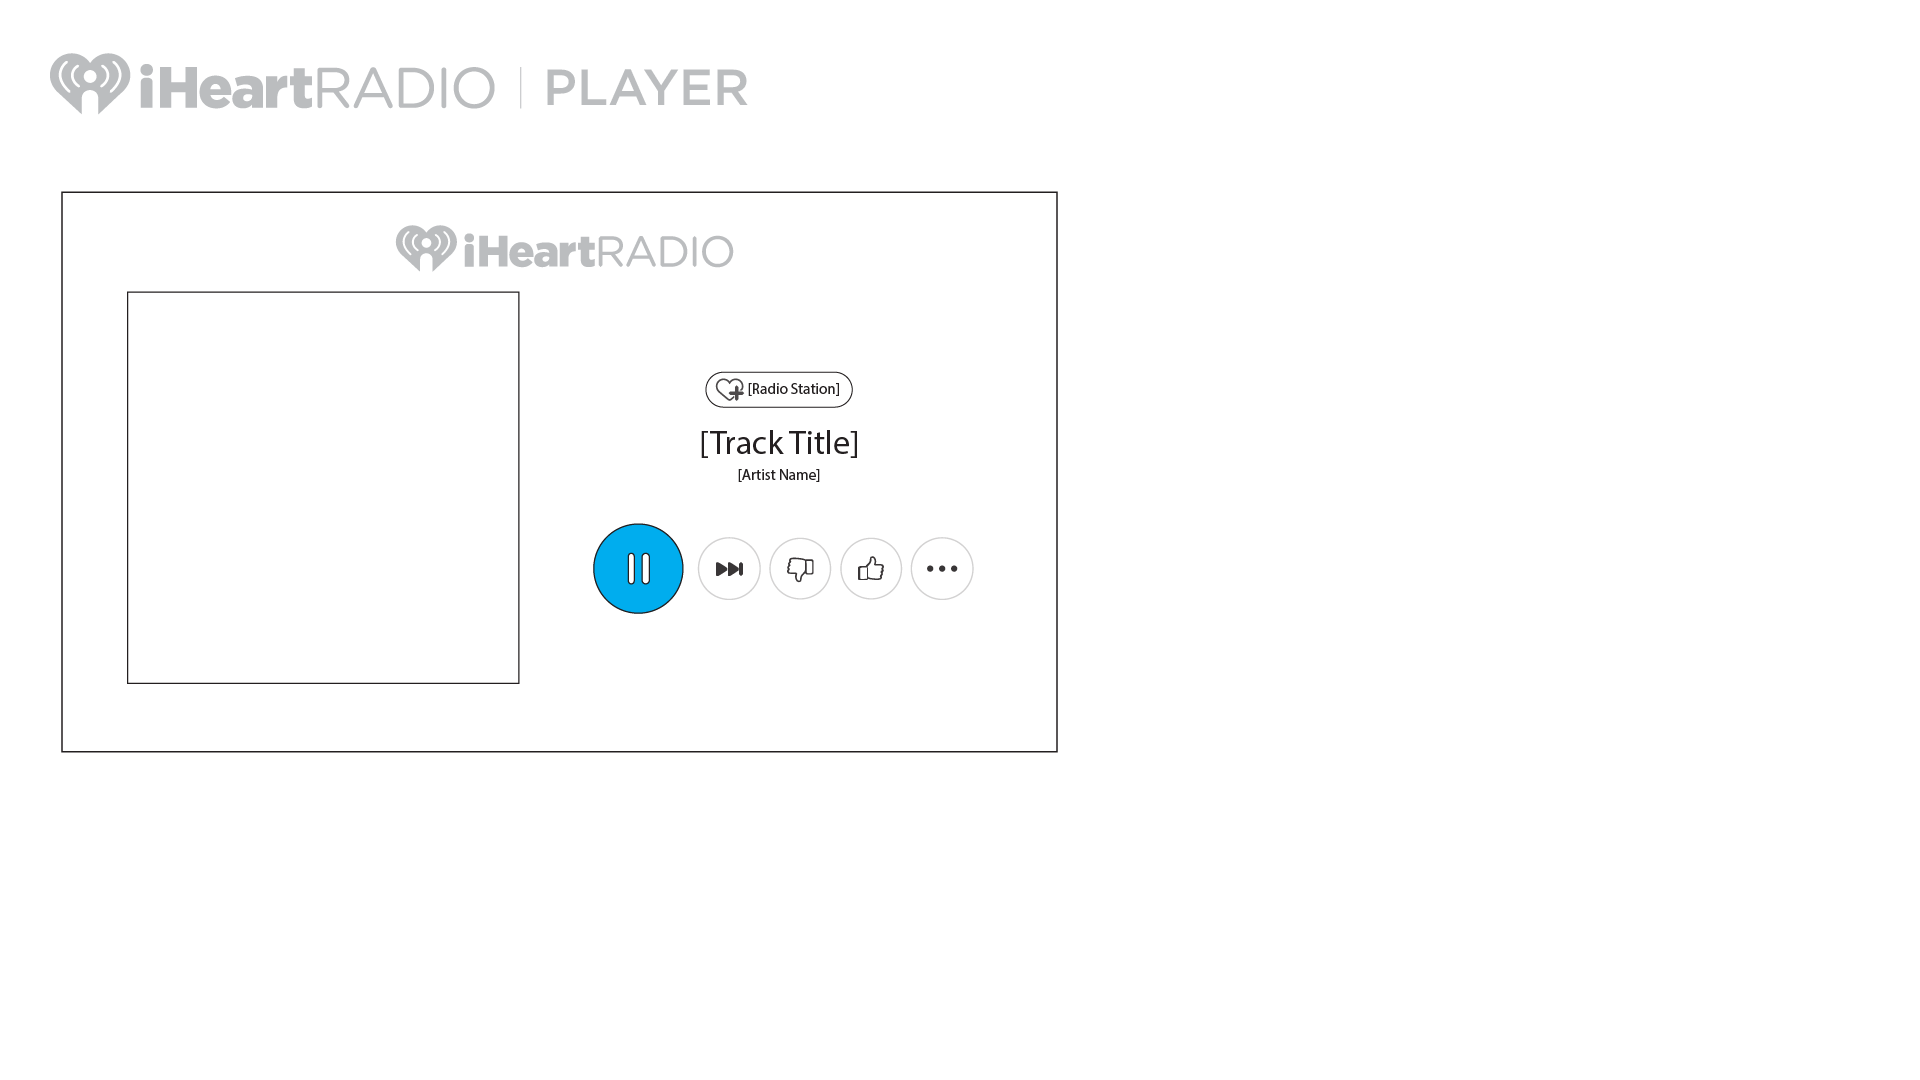 ihr_tv_ux_4a-player.png